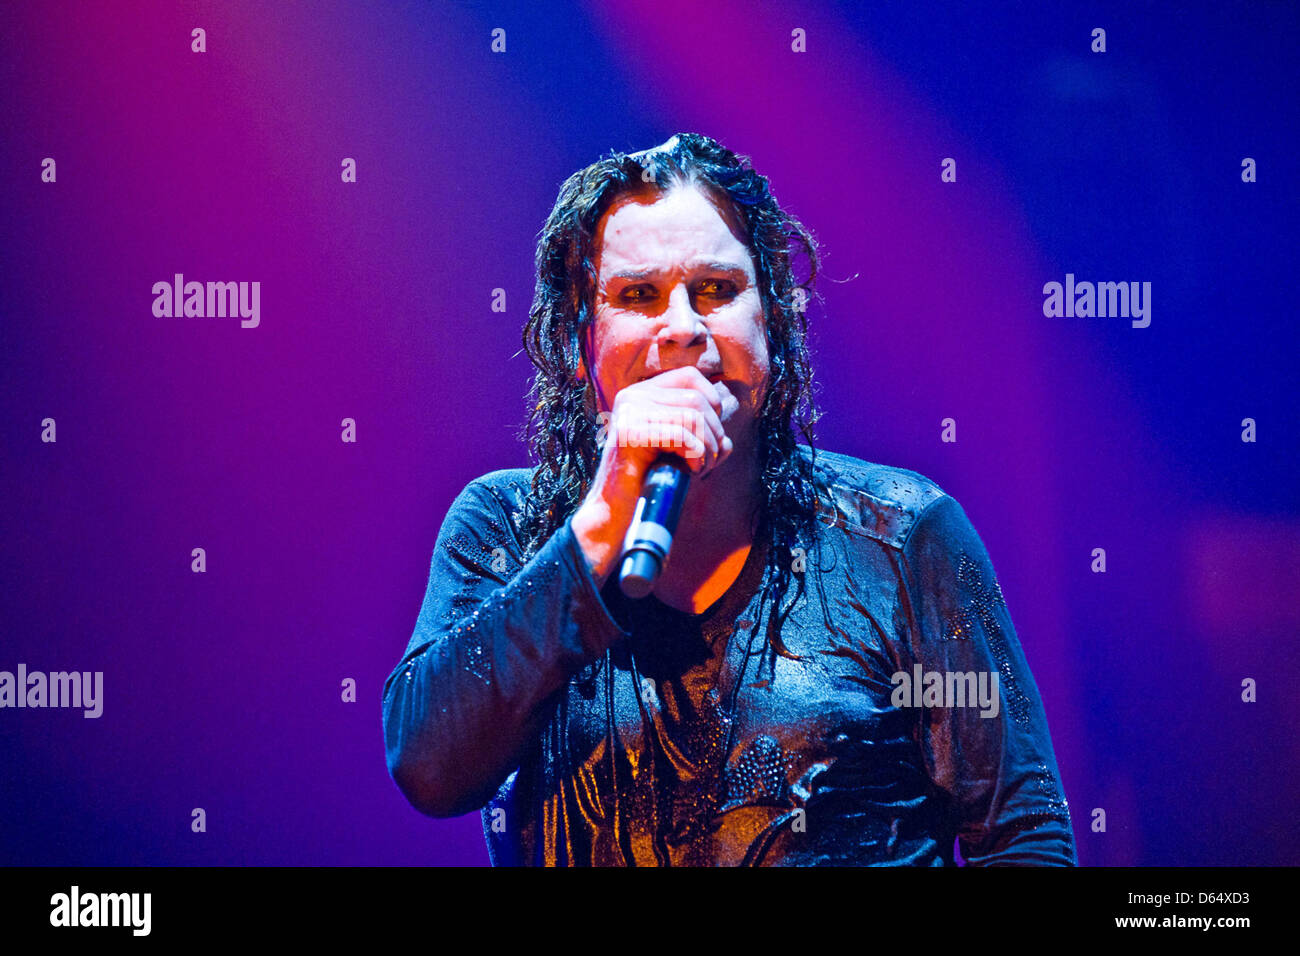 British rock musician Ozzy Osbourne performs at Westfalenhalled in Dortmund, Germany, 04 June 2012. The concert was a replacement for the cancelled Black Sabbath Tour. Photo: Revierfoto Stock Photo